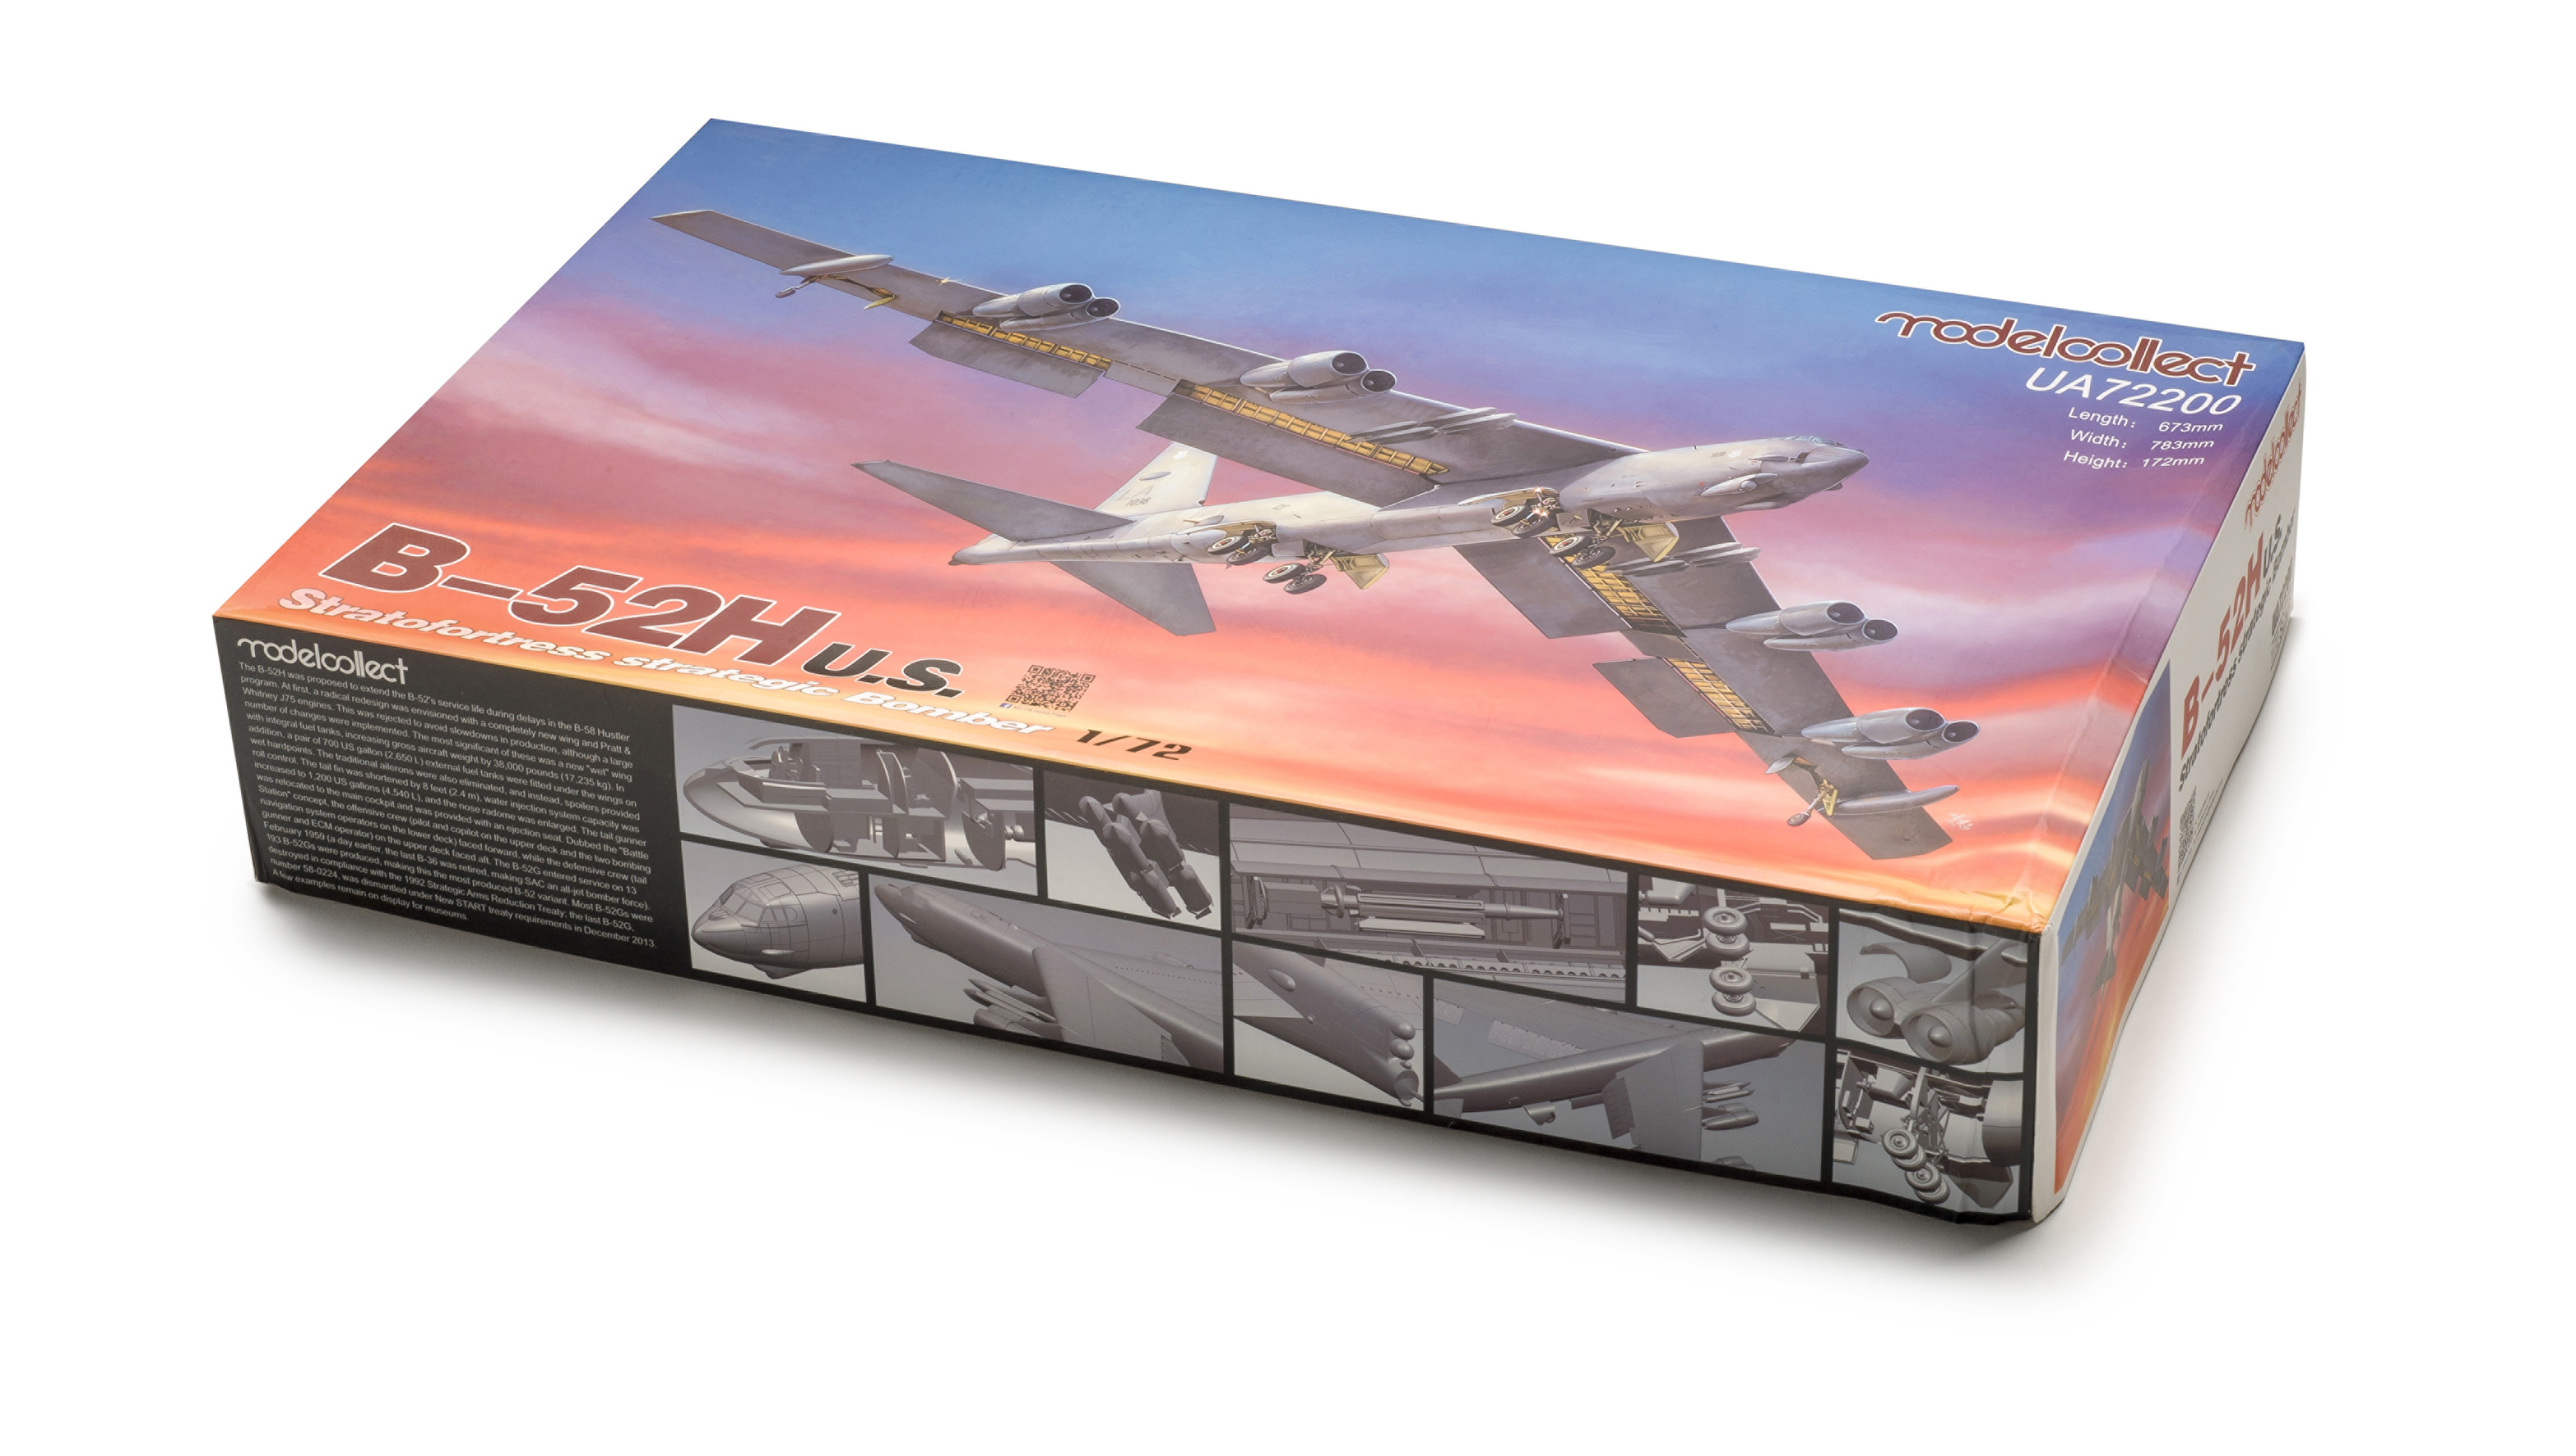 Build review of the Modelcollect B-52H Stratofortress scale model 